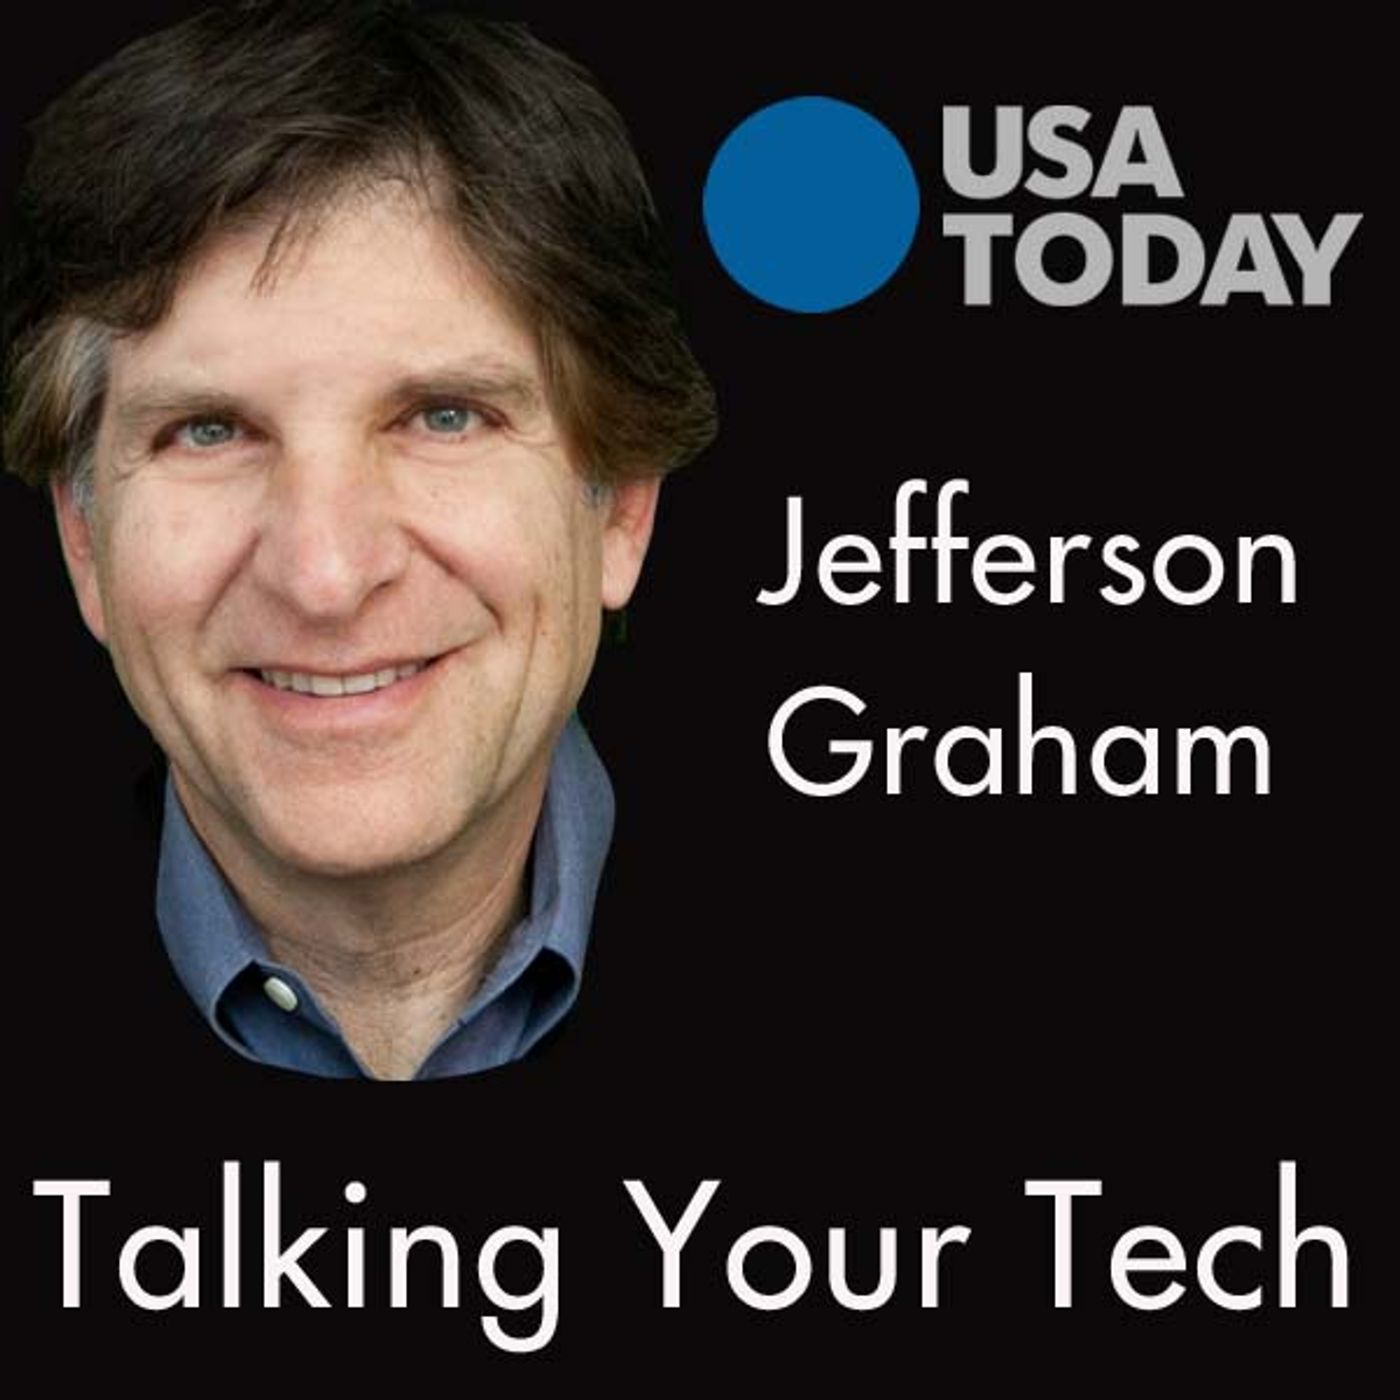 Talking Your Tech with Jefferson Graham